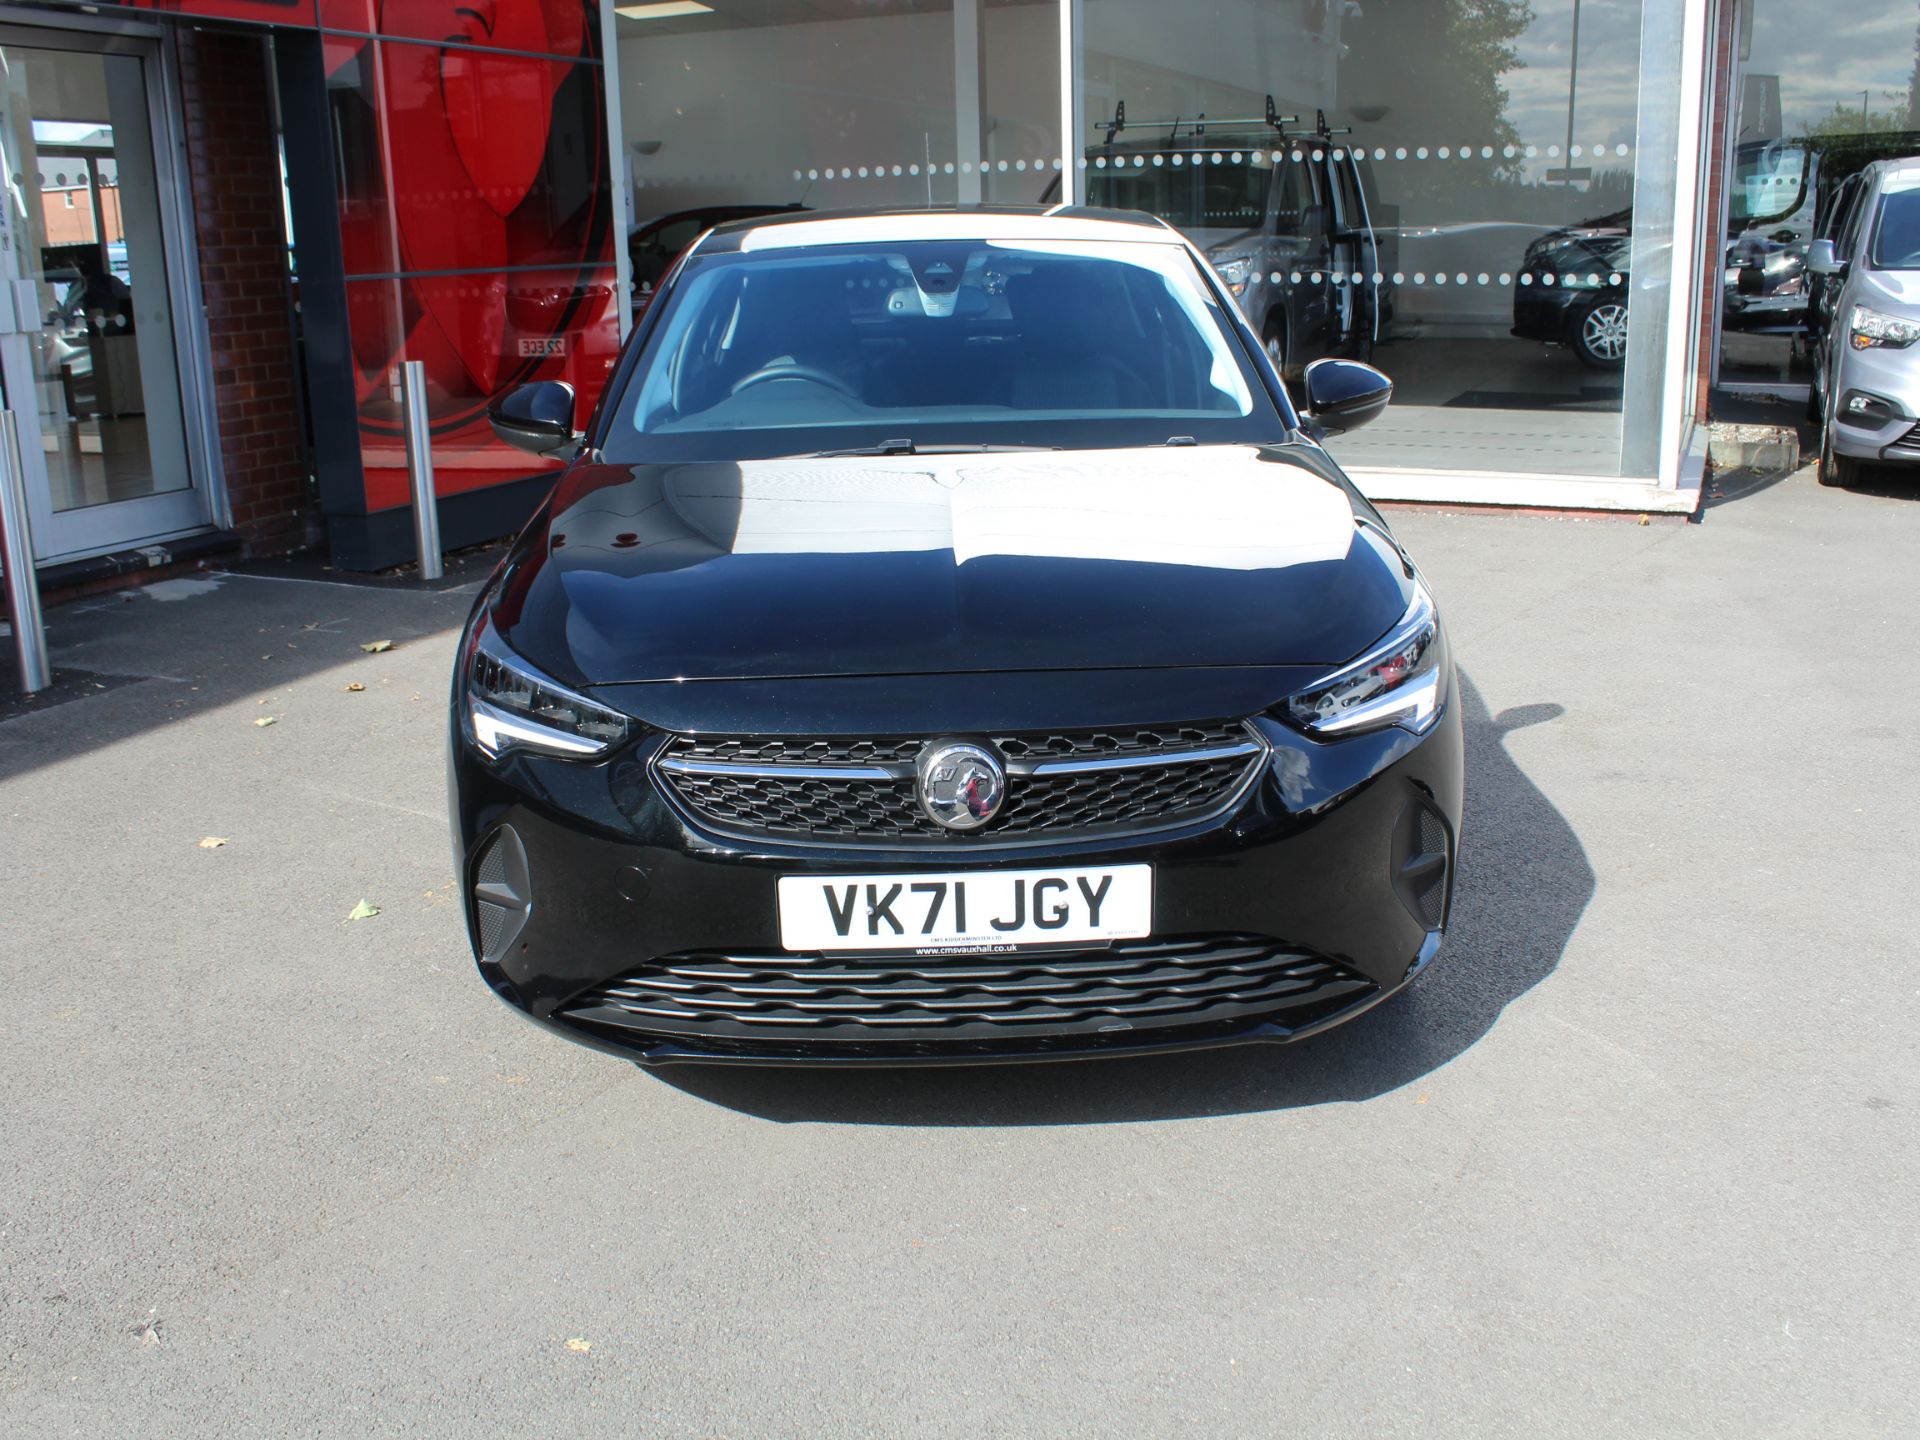 Vauxhall Corsa 1.2 (75ps) Griffin 5dr, Registration: VK71JGY, Date First Registered: 30/09/2021, - Image 3 of 7